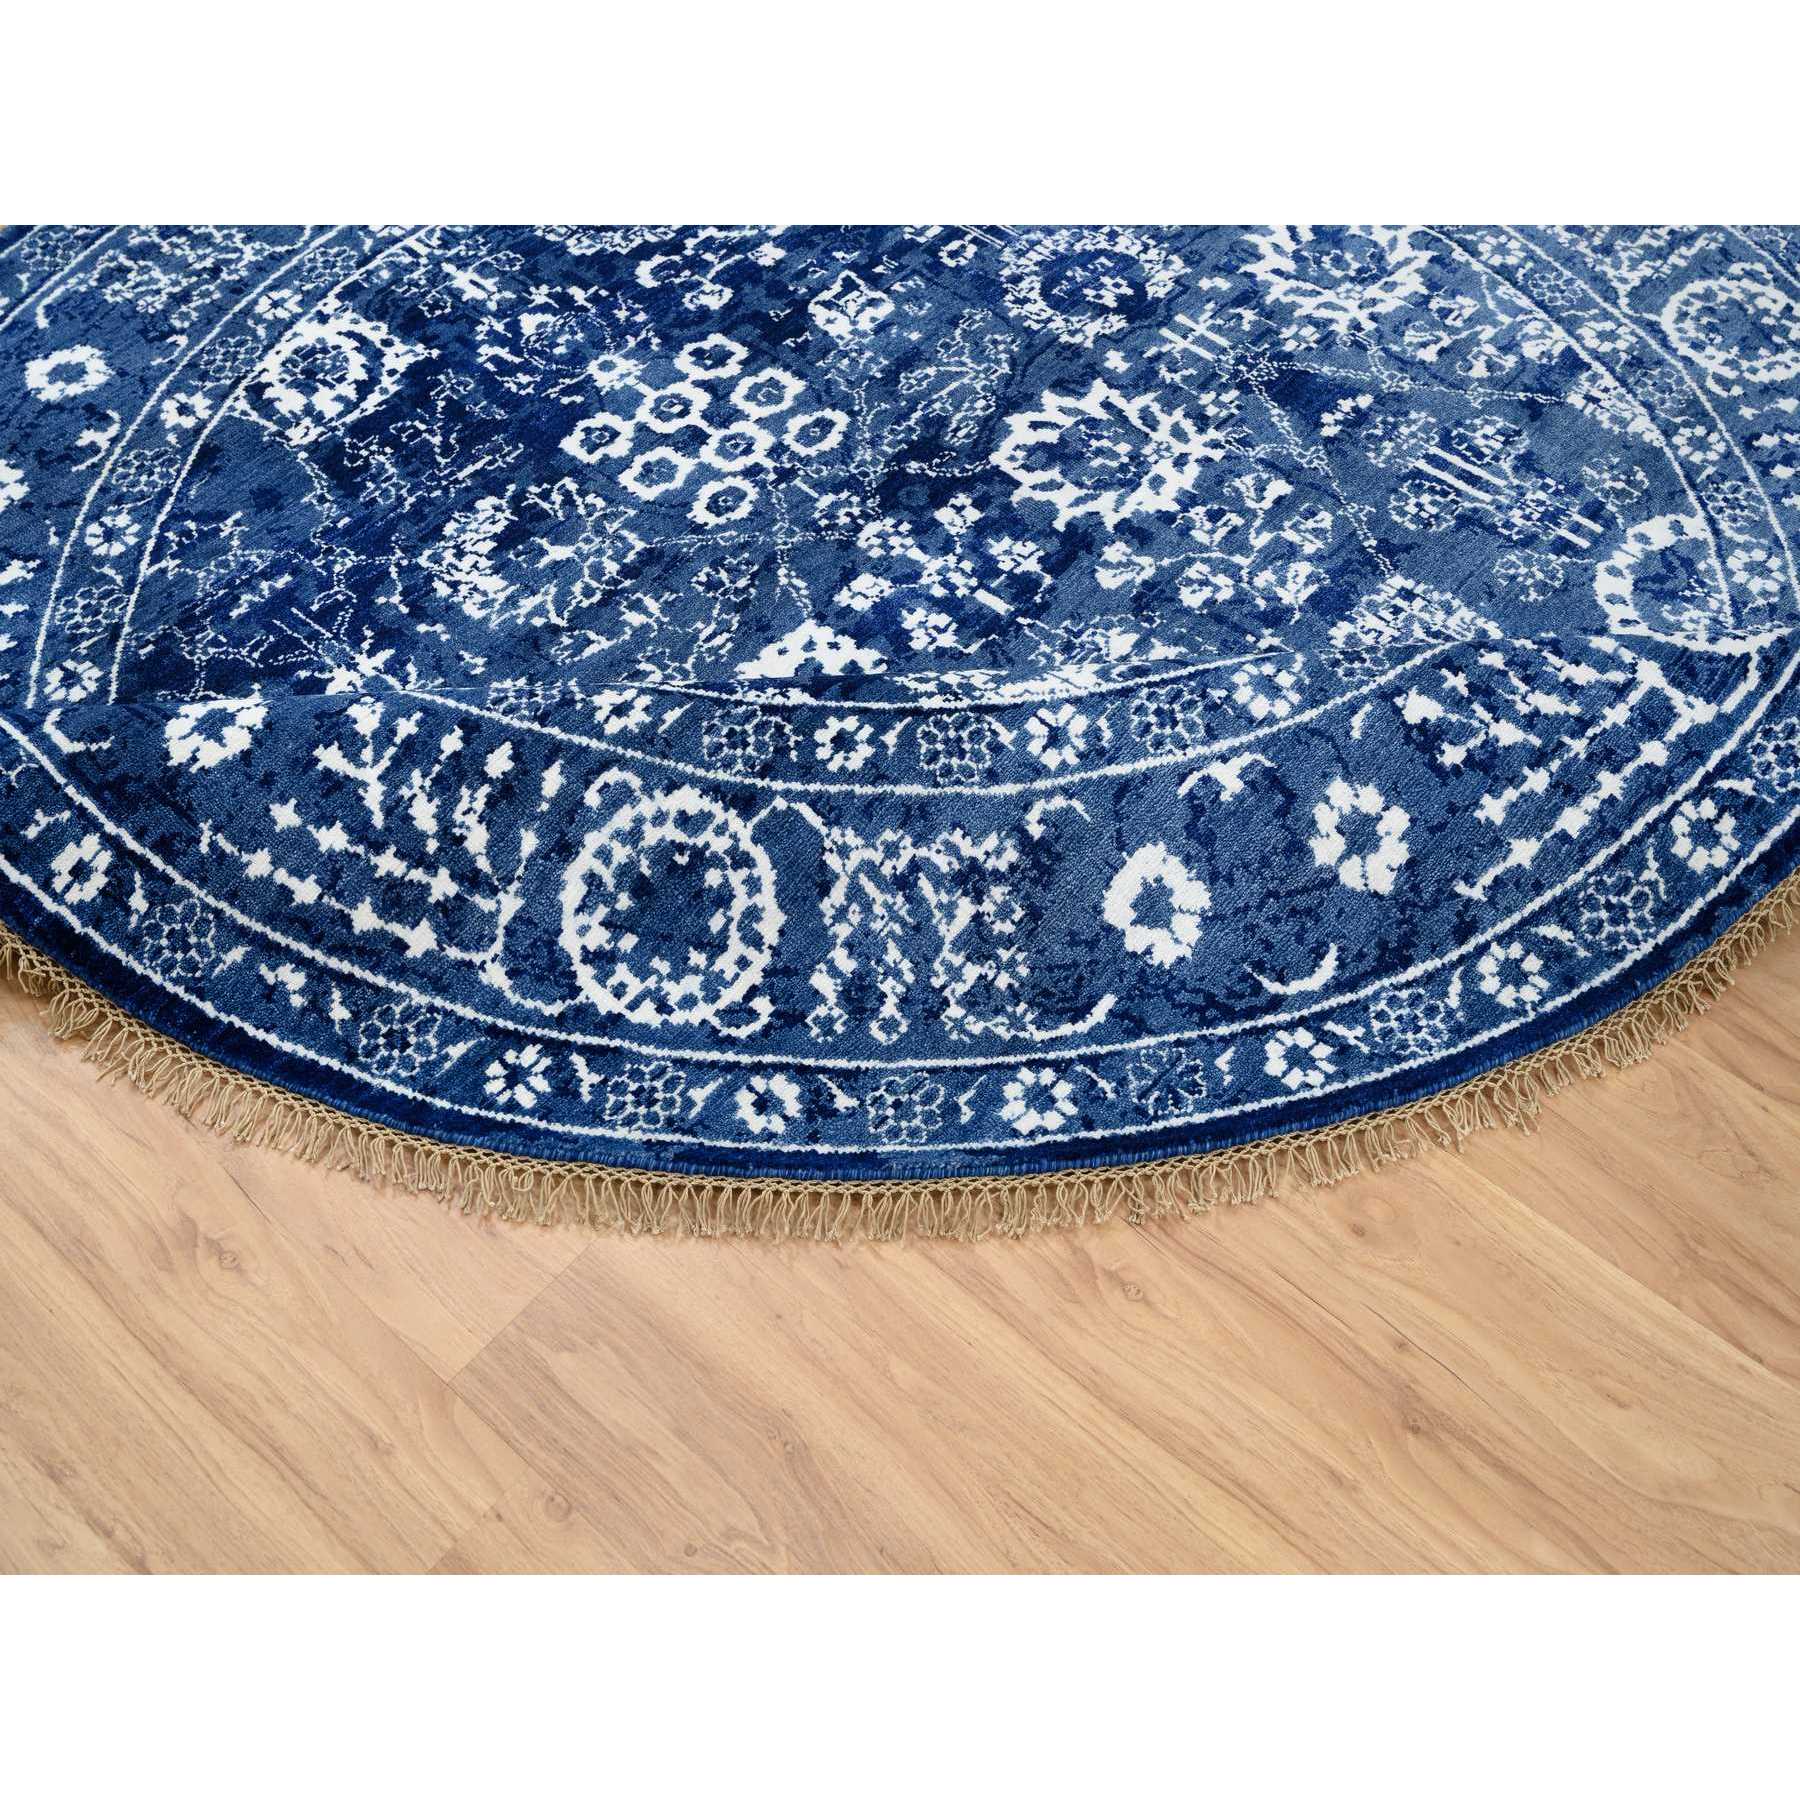 7'3"x7'3" Denim Blue, Hand Woven Tabriz with All Over Motifs, Tone on Tone Wool and Silk, Round Oriental Rug 